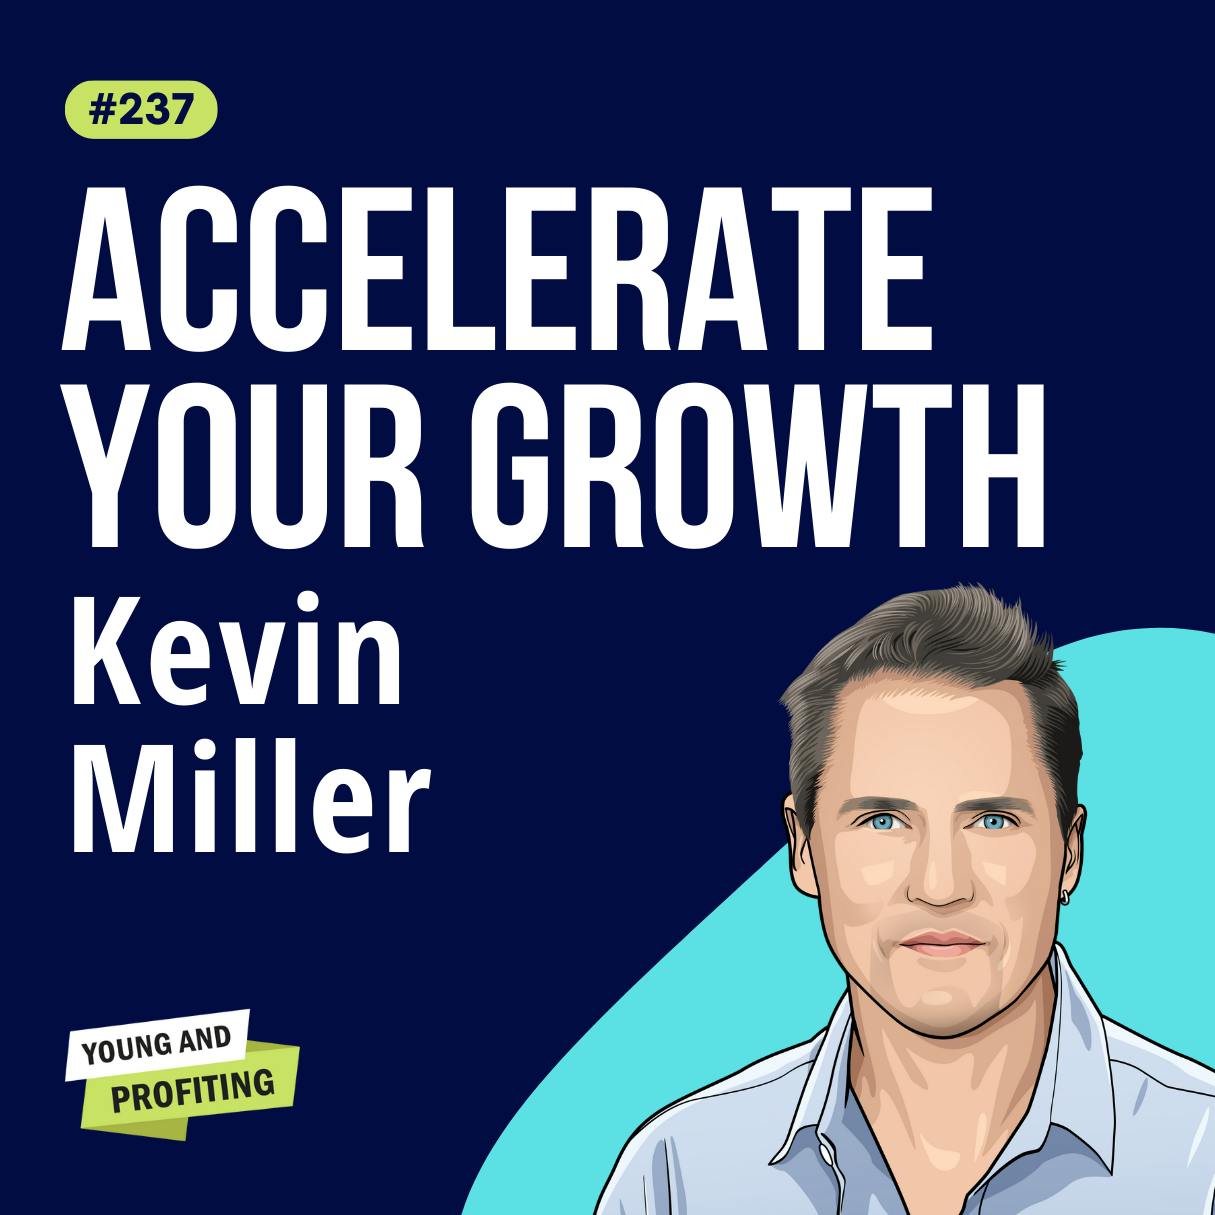 Kevin Miller: Driven, Unlocking the Forces that Propel Us Forward | E237 by Hala Taha | YAP Media Network